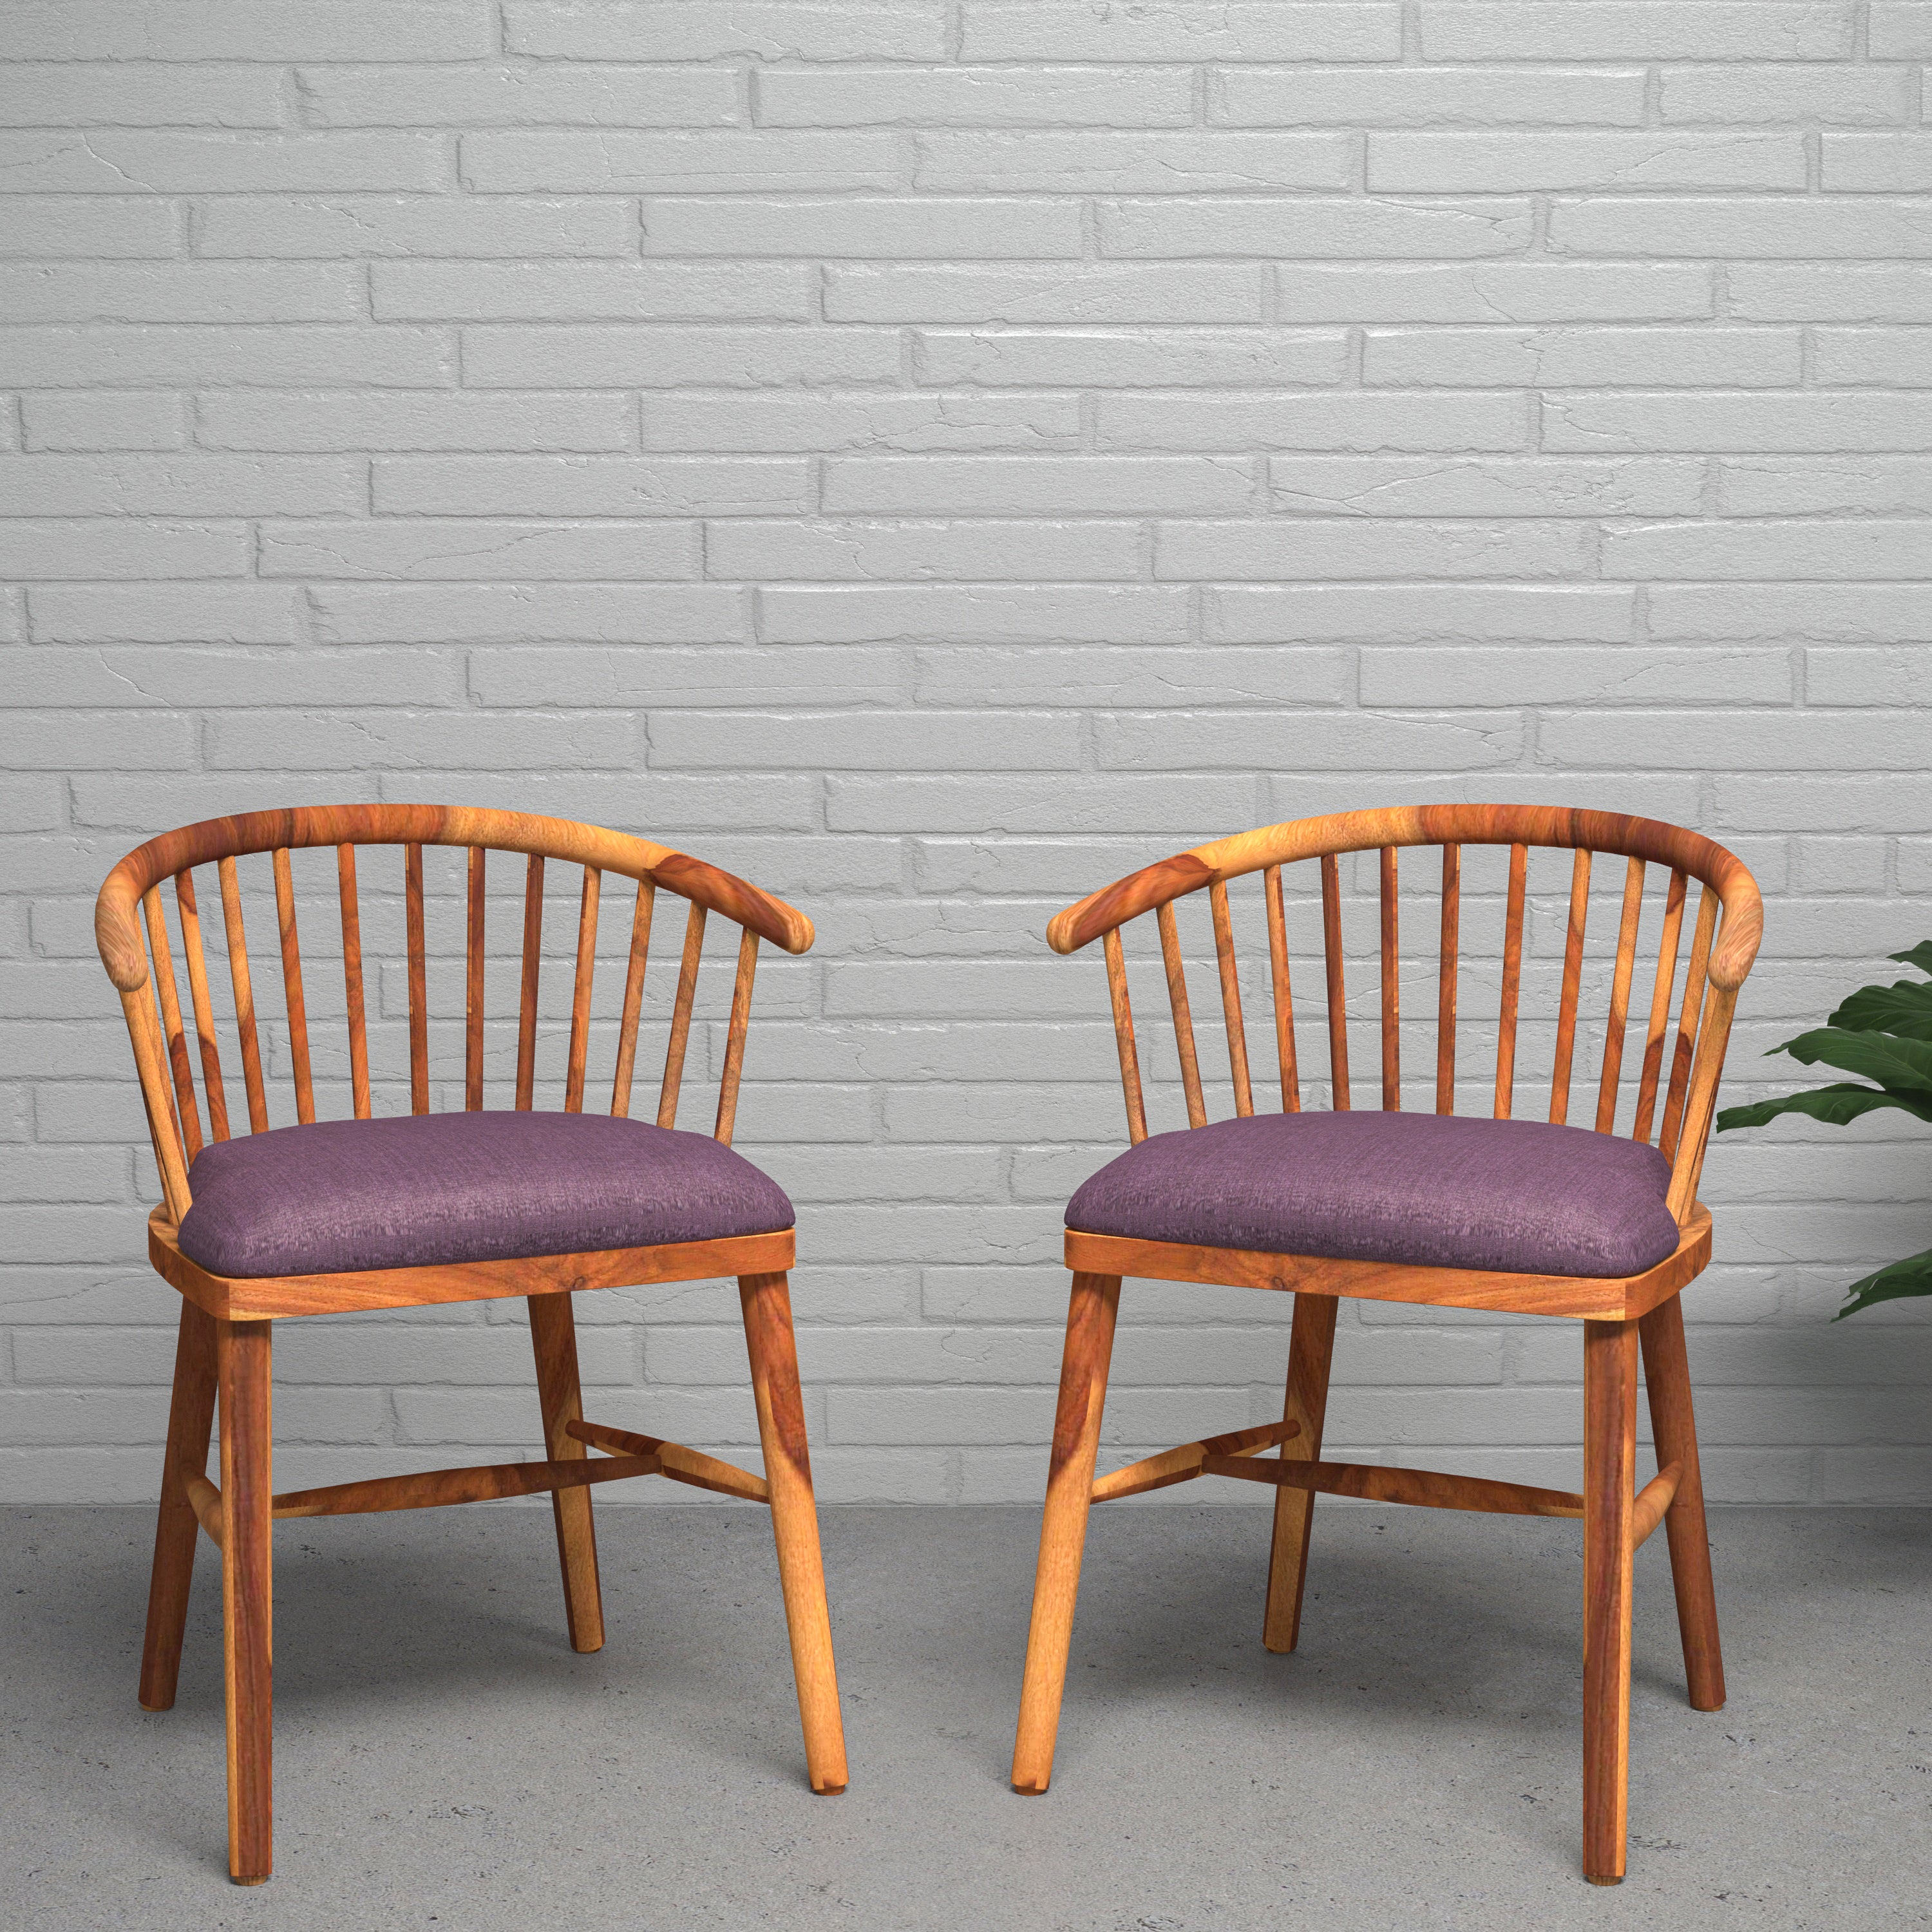 Classic Curved Back Wooden Handmade Chair Set of 2 for Home Arm Chair